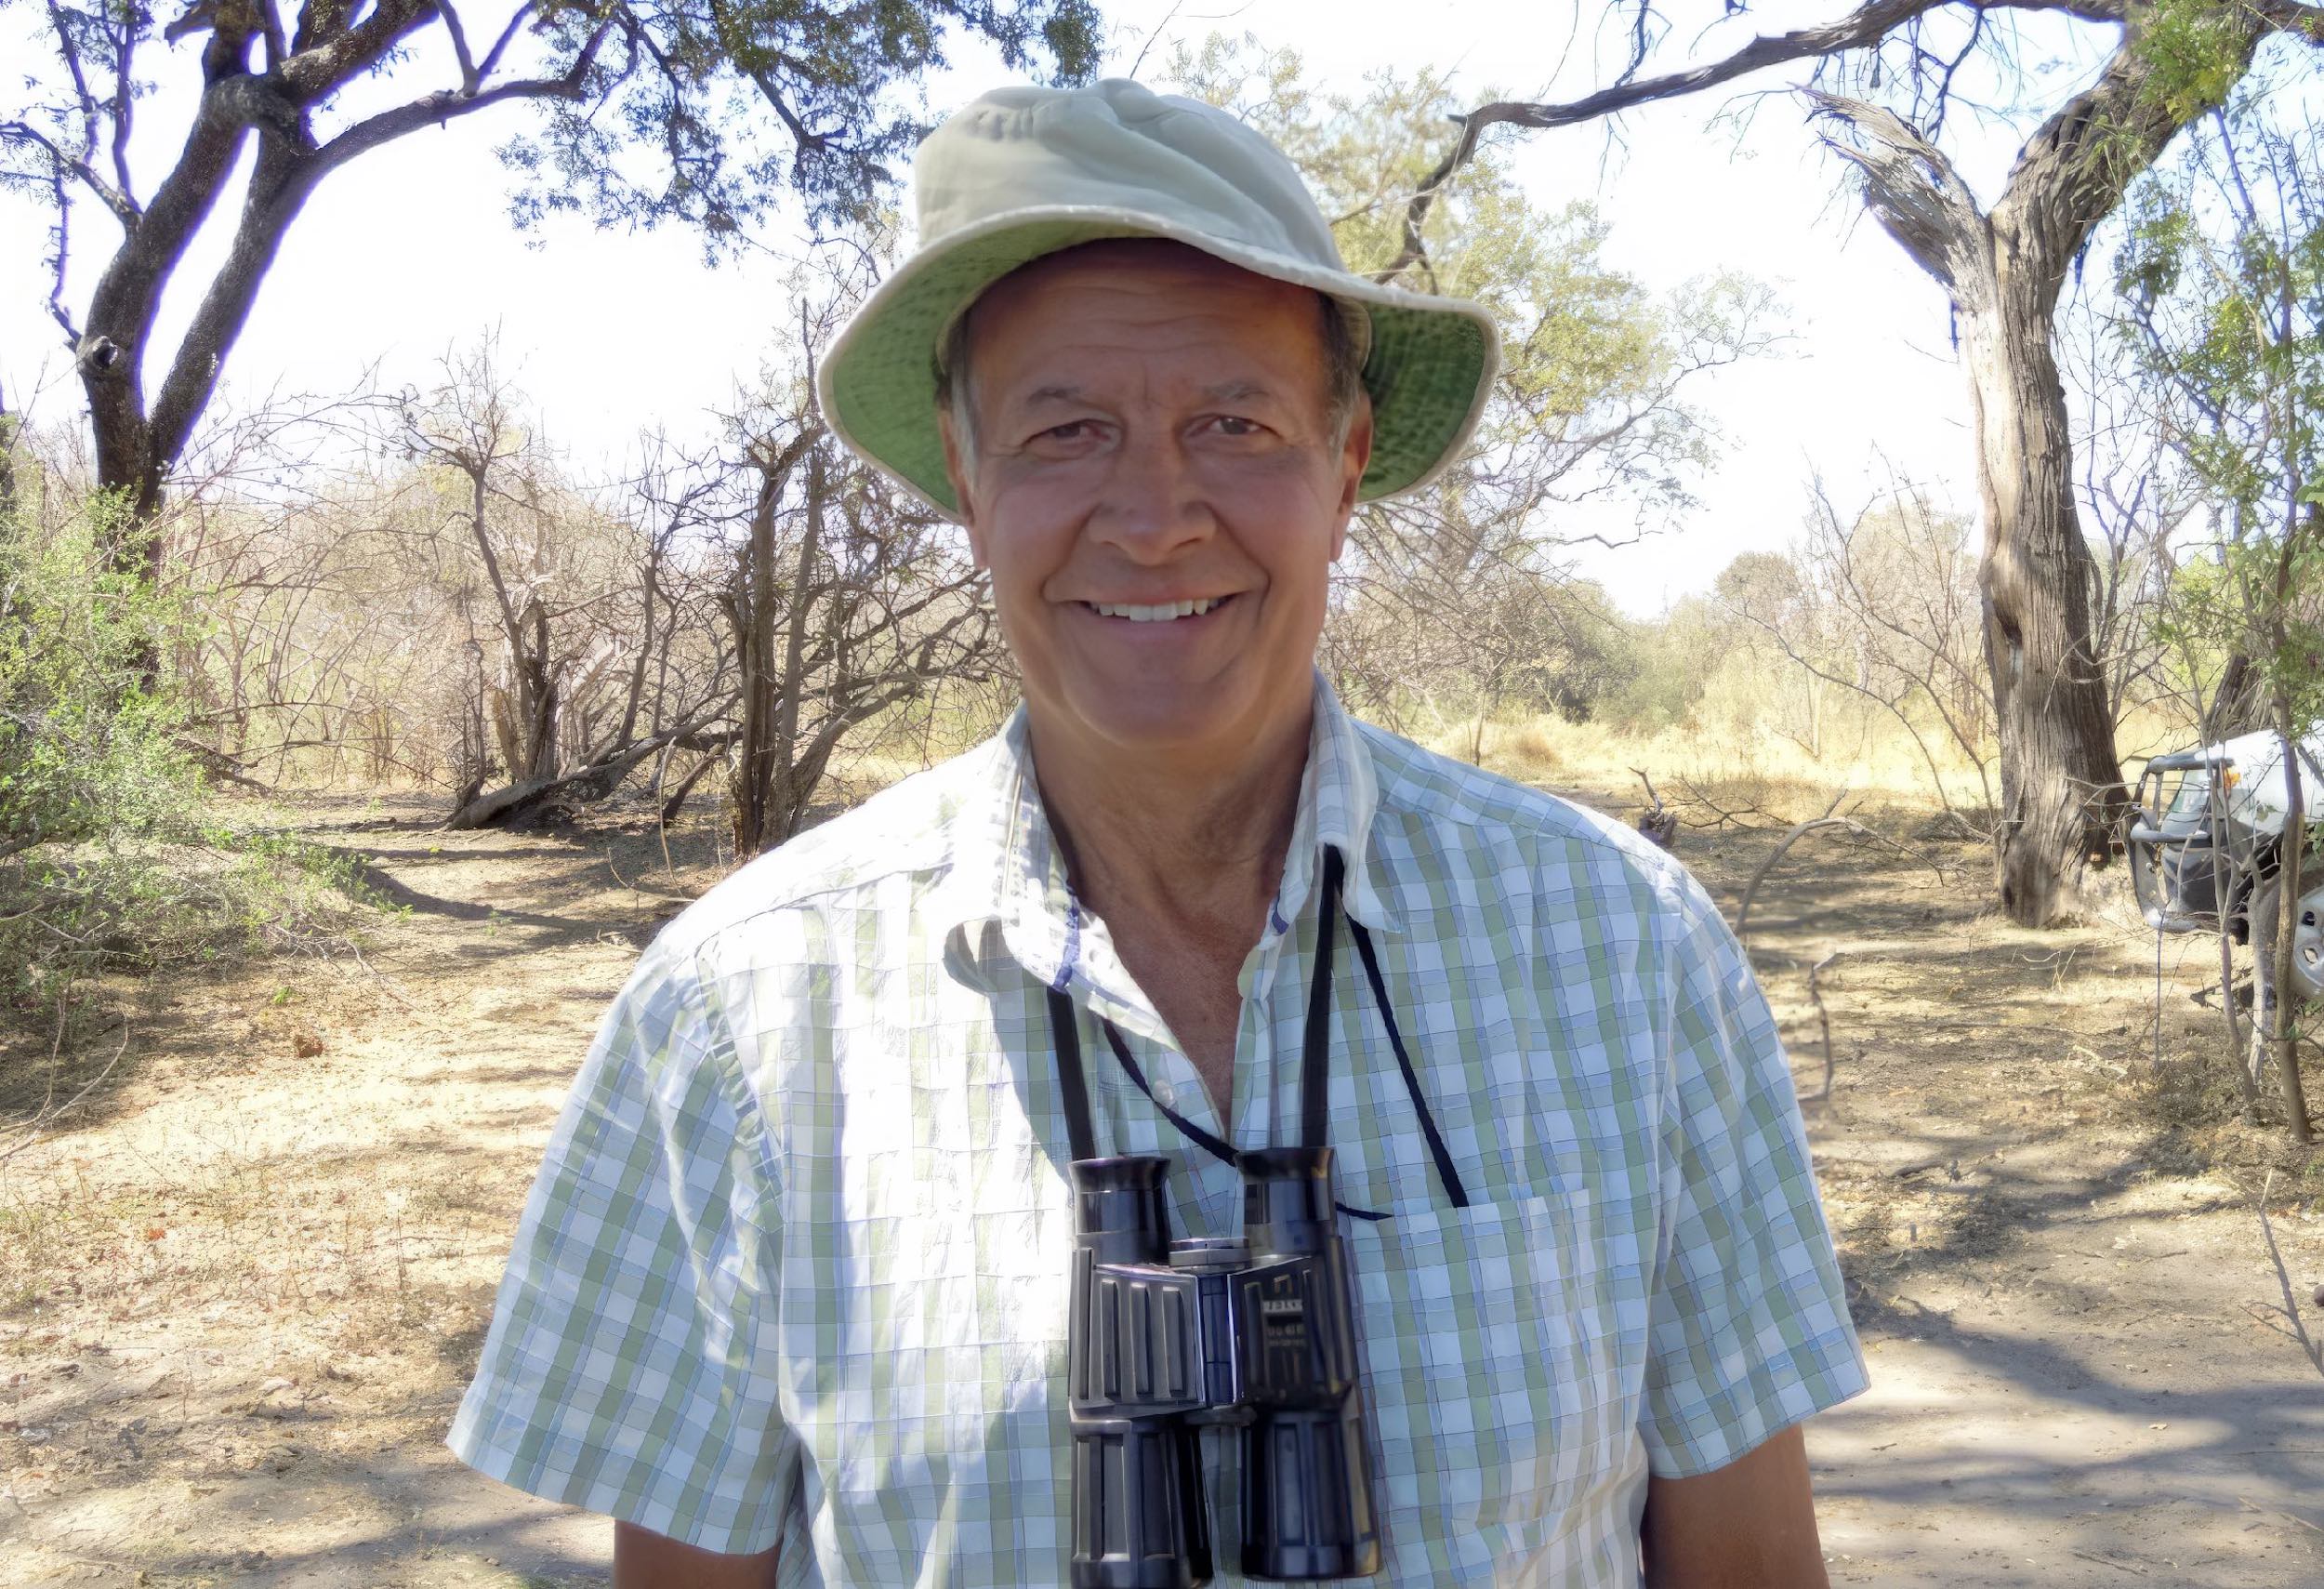 Dave Ward wearing a sunhat and with a pair of binoculars around his neck, smiling at the camera.